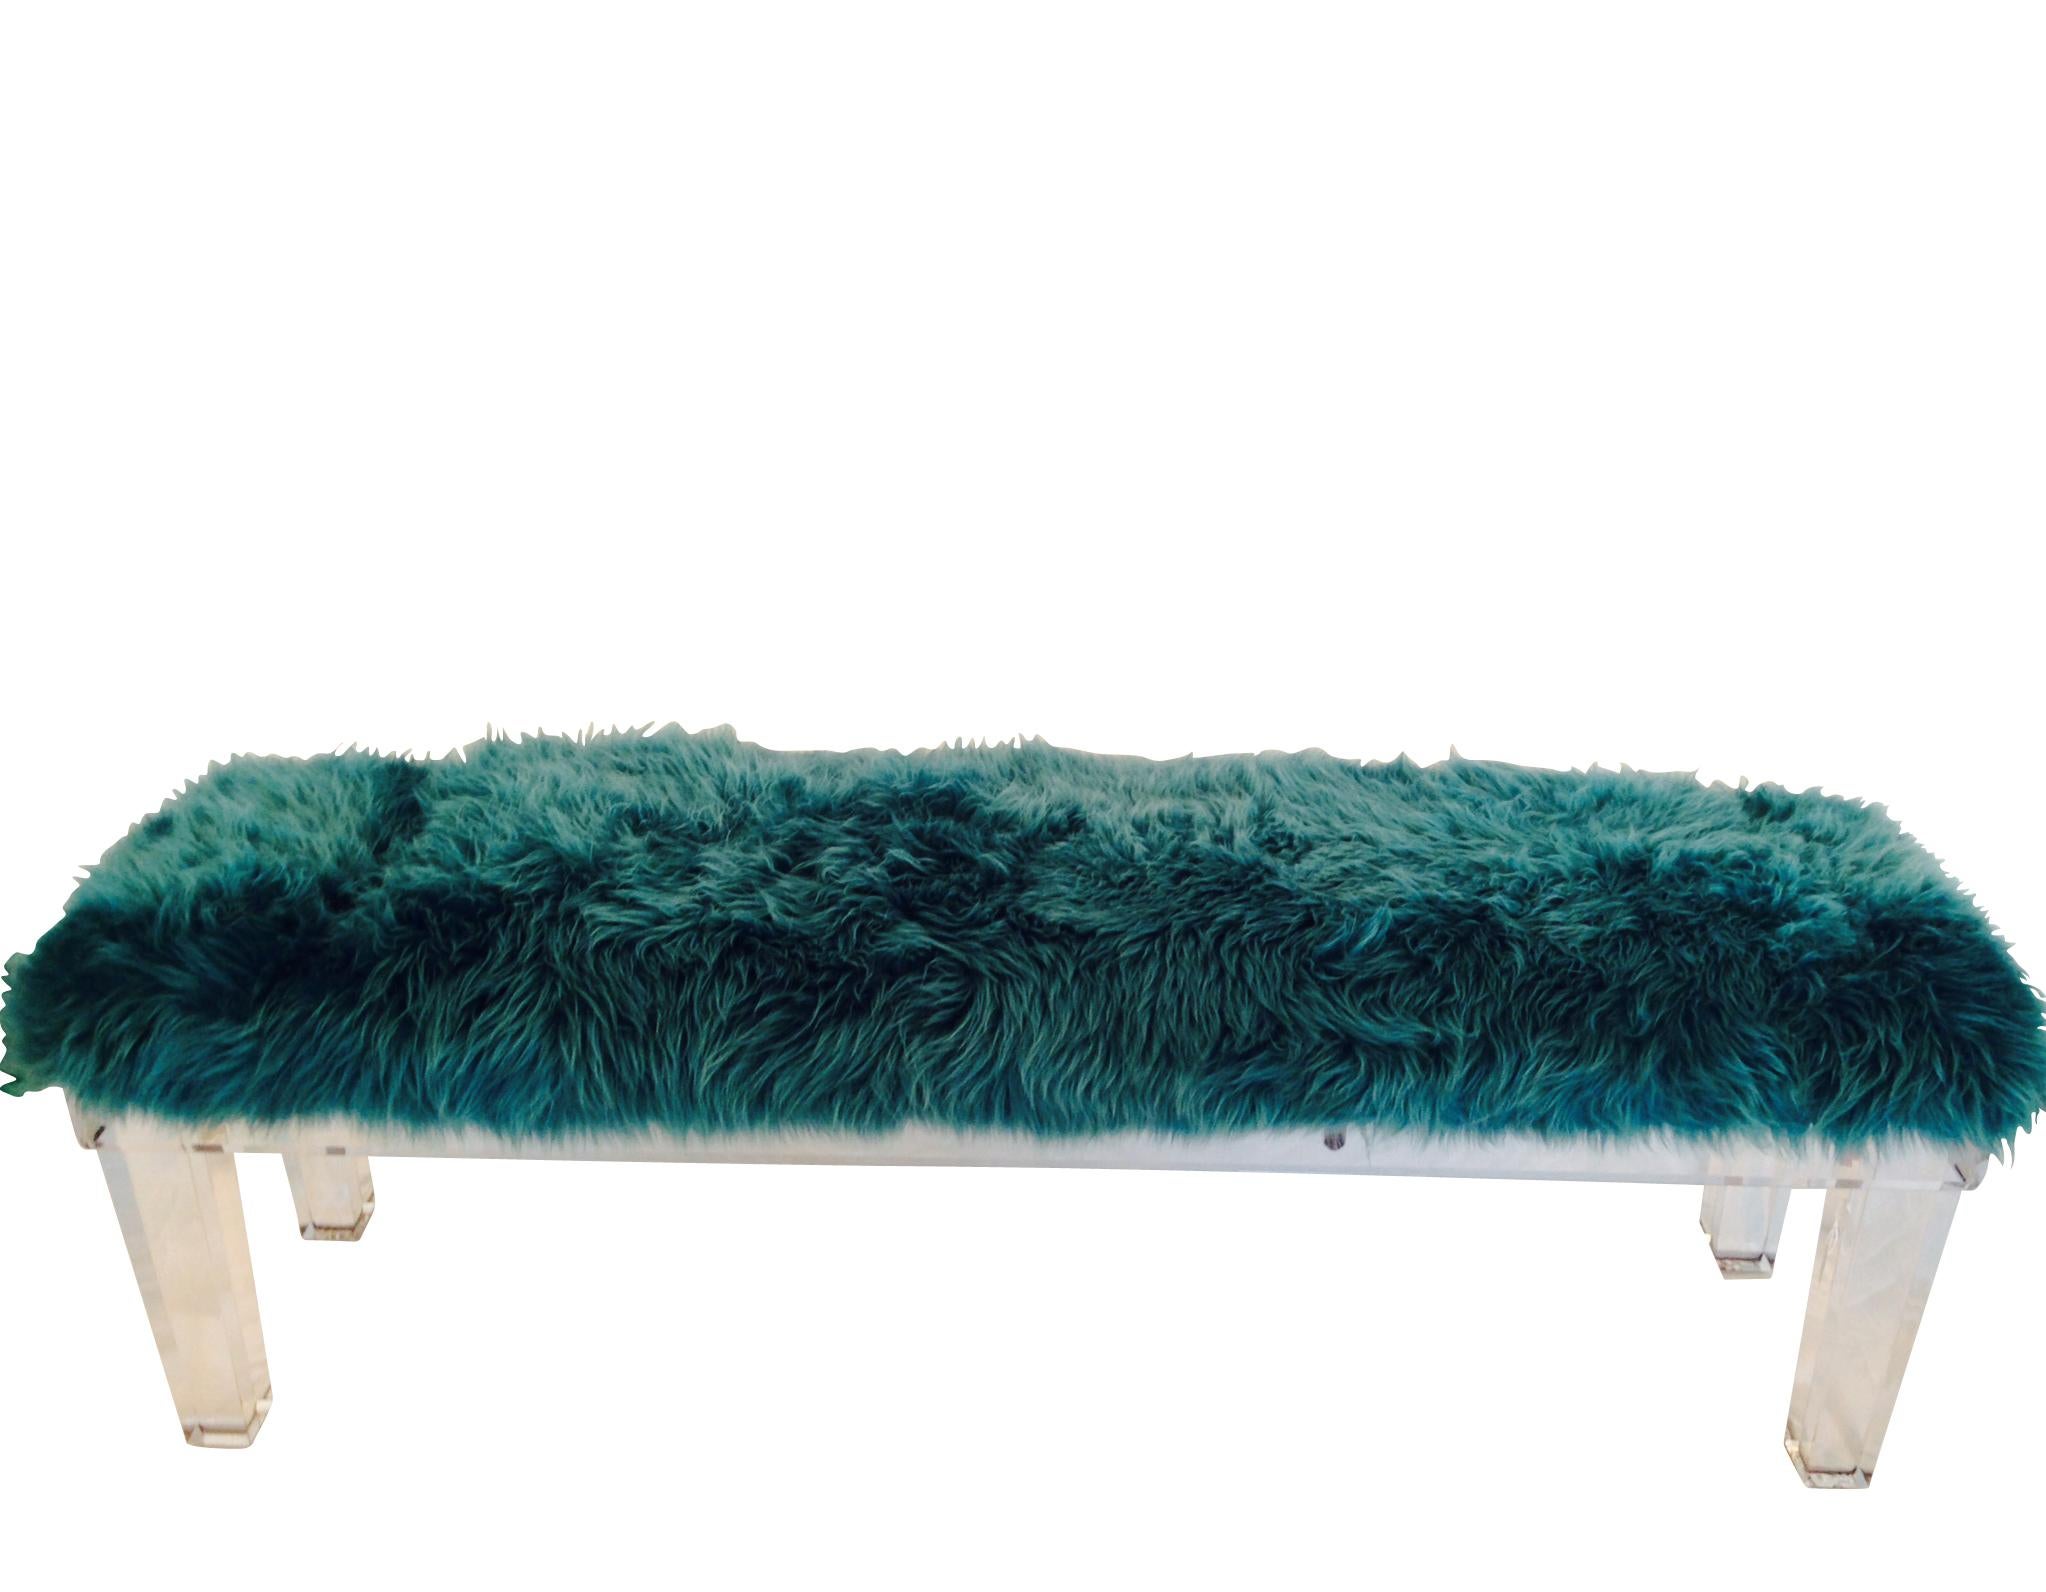 21st Century Modern custom crafted thick solid leg Lucite bench with Mongolian fur teal colored pelt upholstered top.  New-never used-floor sample.

